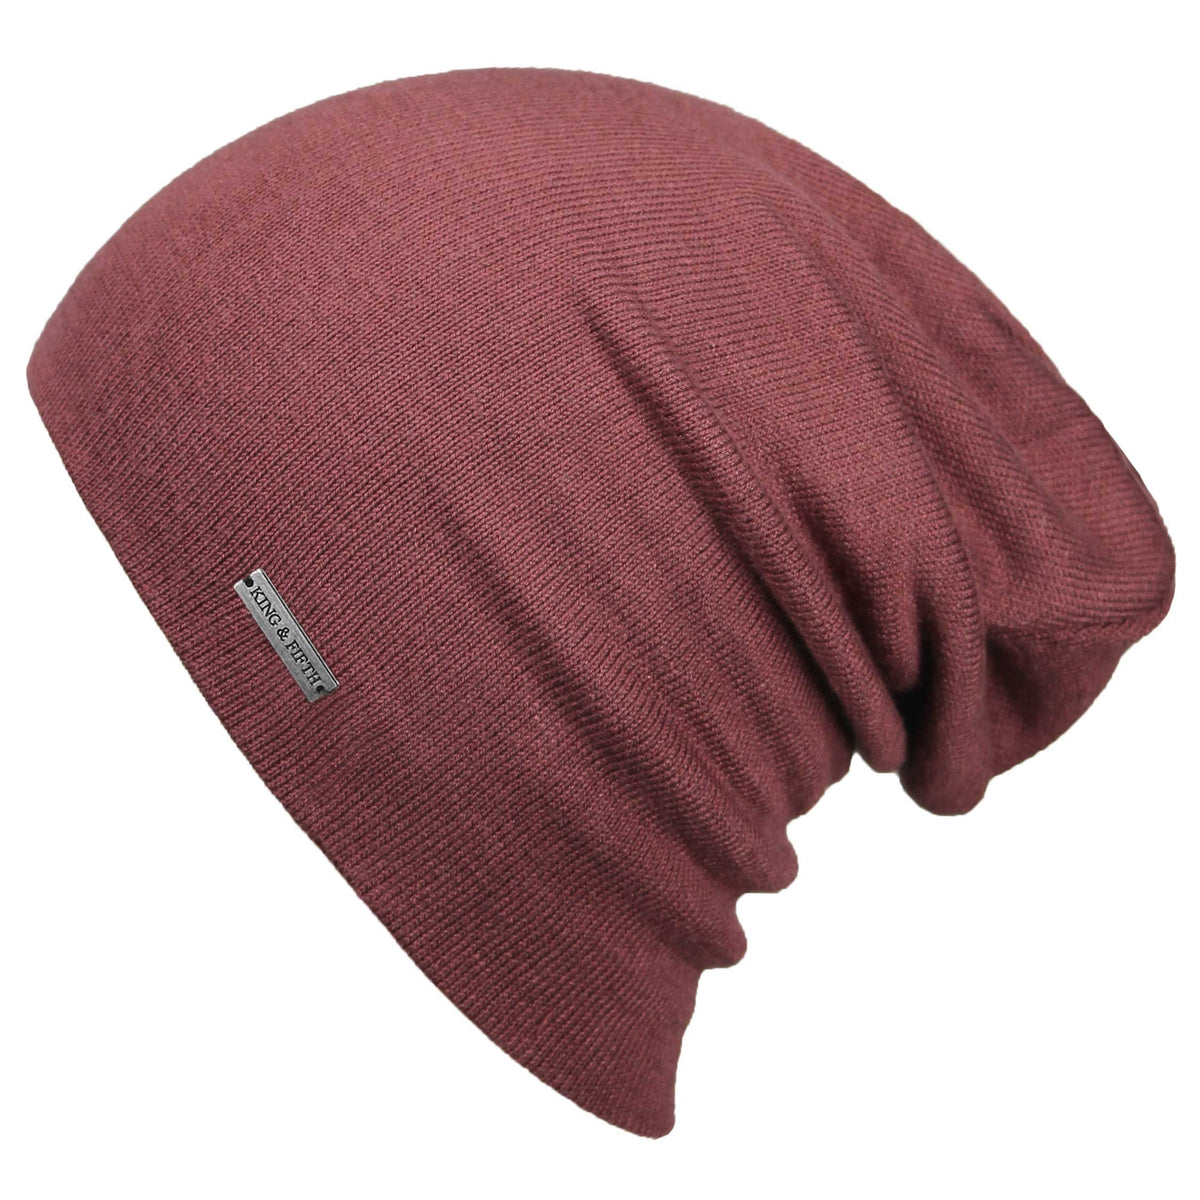 - Slouchy - Beanie - LW King Lightweight and Fifth Allure Mens The Supply Beanie Summer